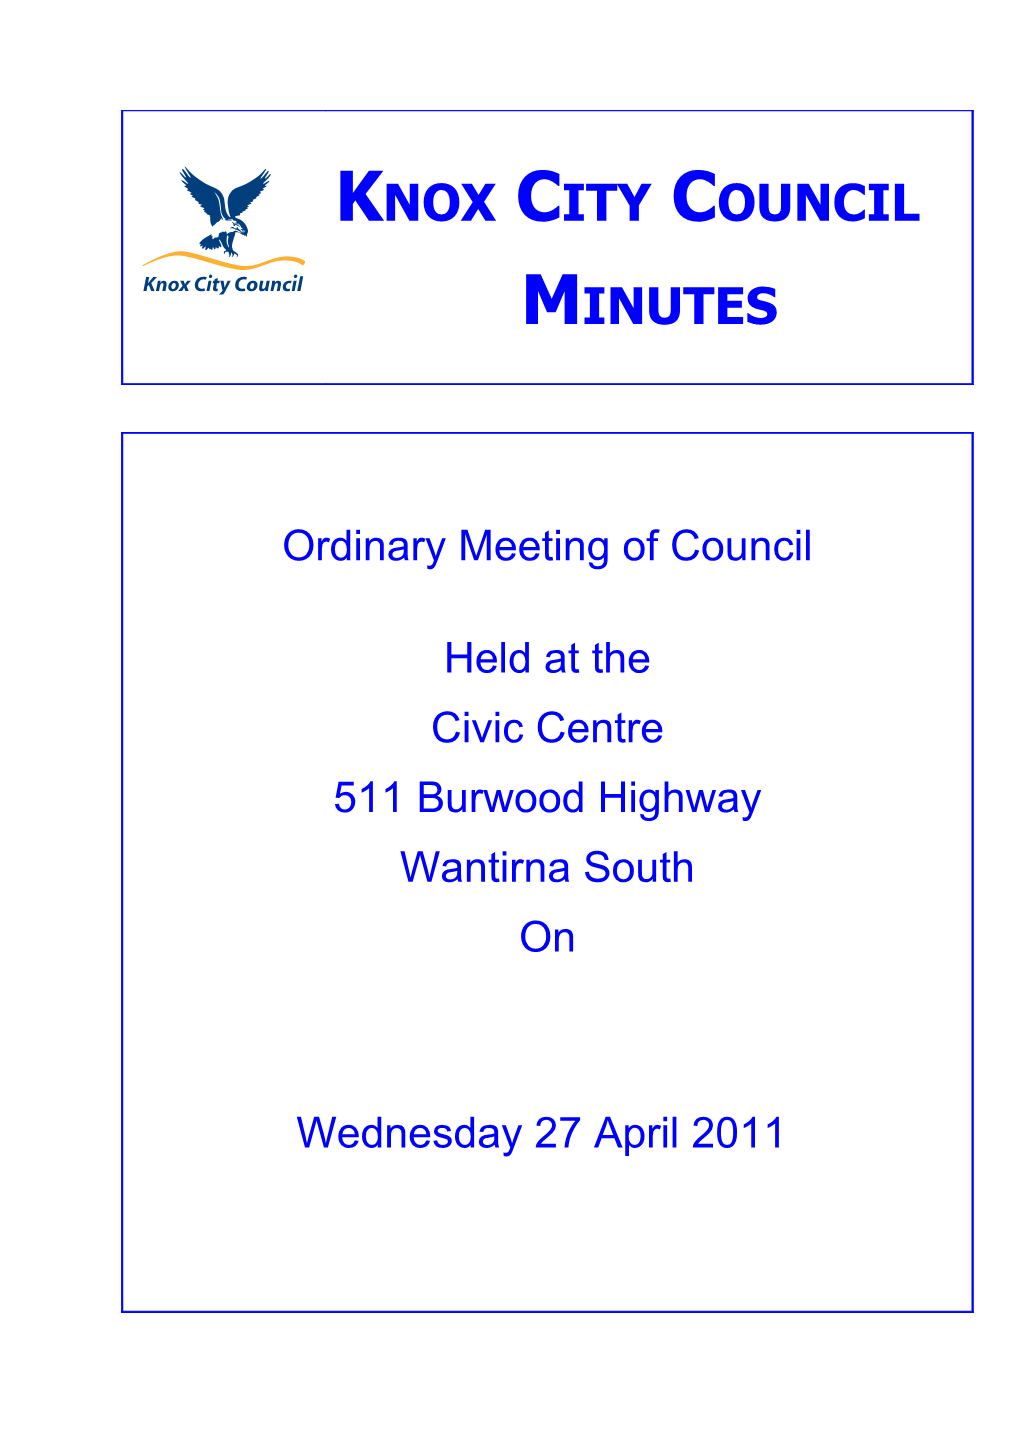 Minutes for the Ordinary Meeting of Council Held at The